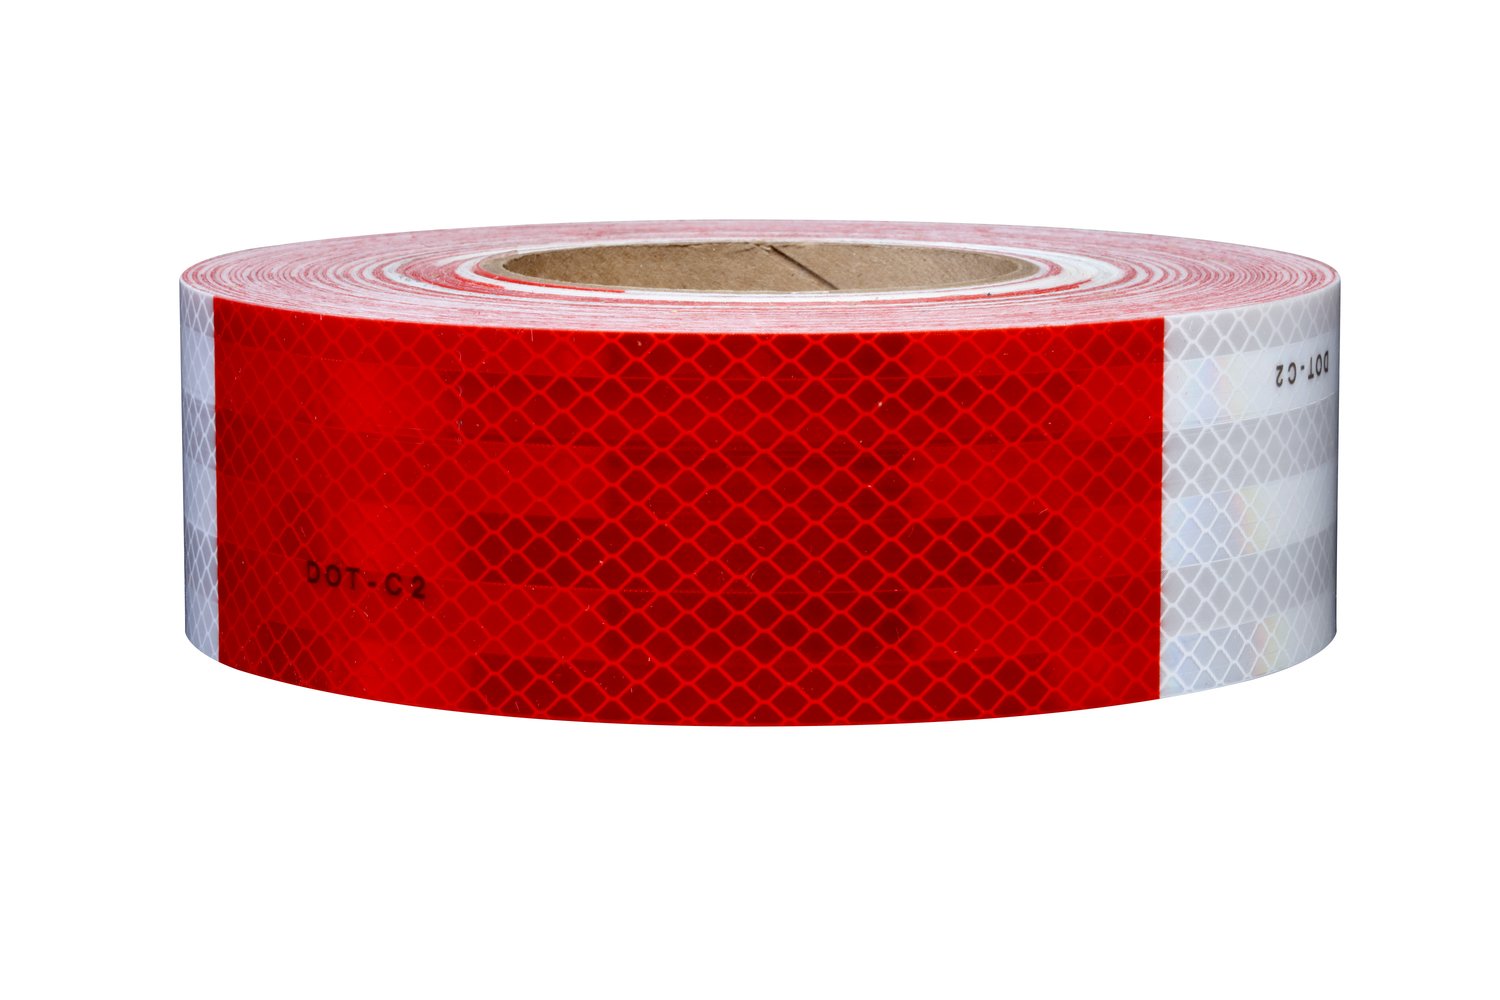 7010388939 - 3M Diamond Grade Conspicuity Markings 983-326, Red/White, 28420, 2 in
x 50 yd, 1/Carton, kiss-cut every 12 in